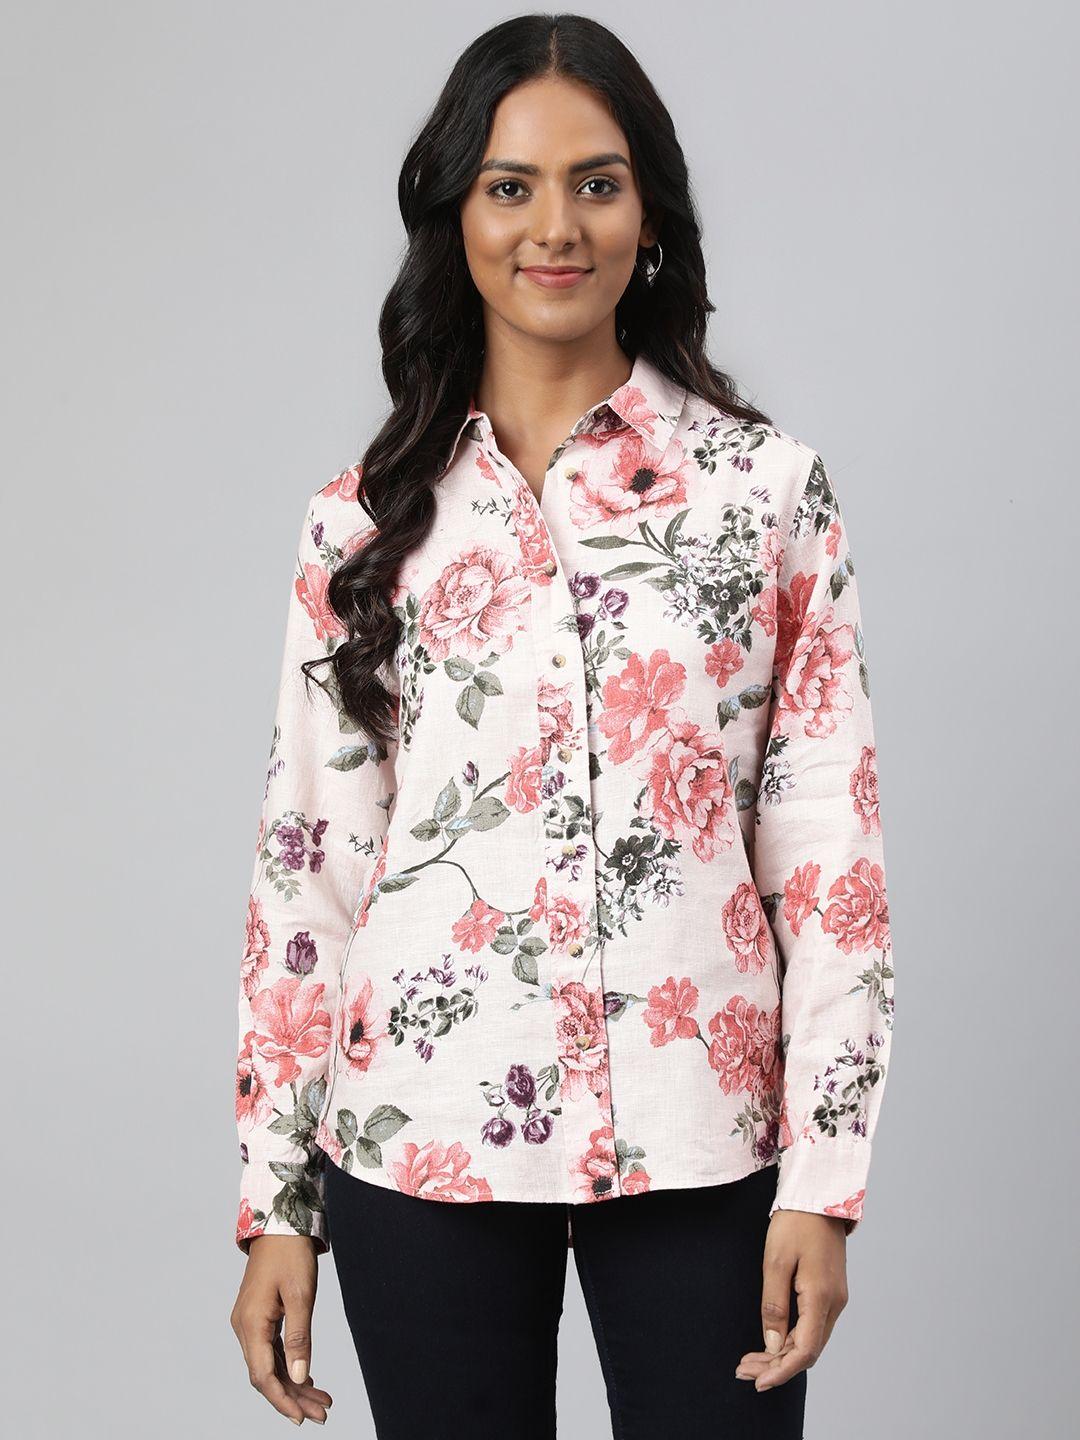 marks & spencer women off white & pink floral printed casual shirt